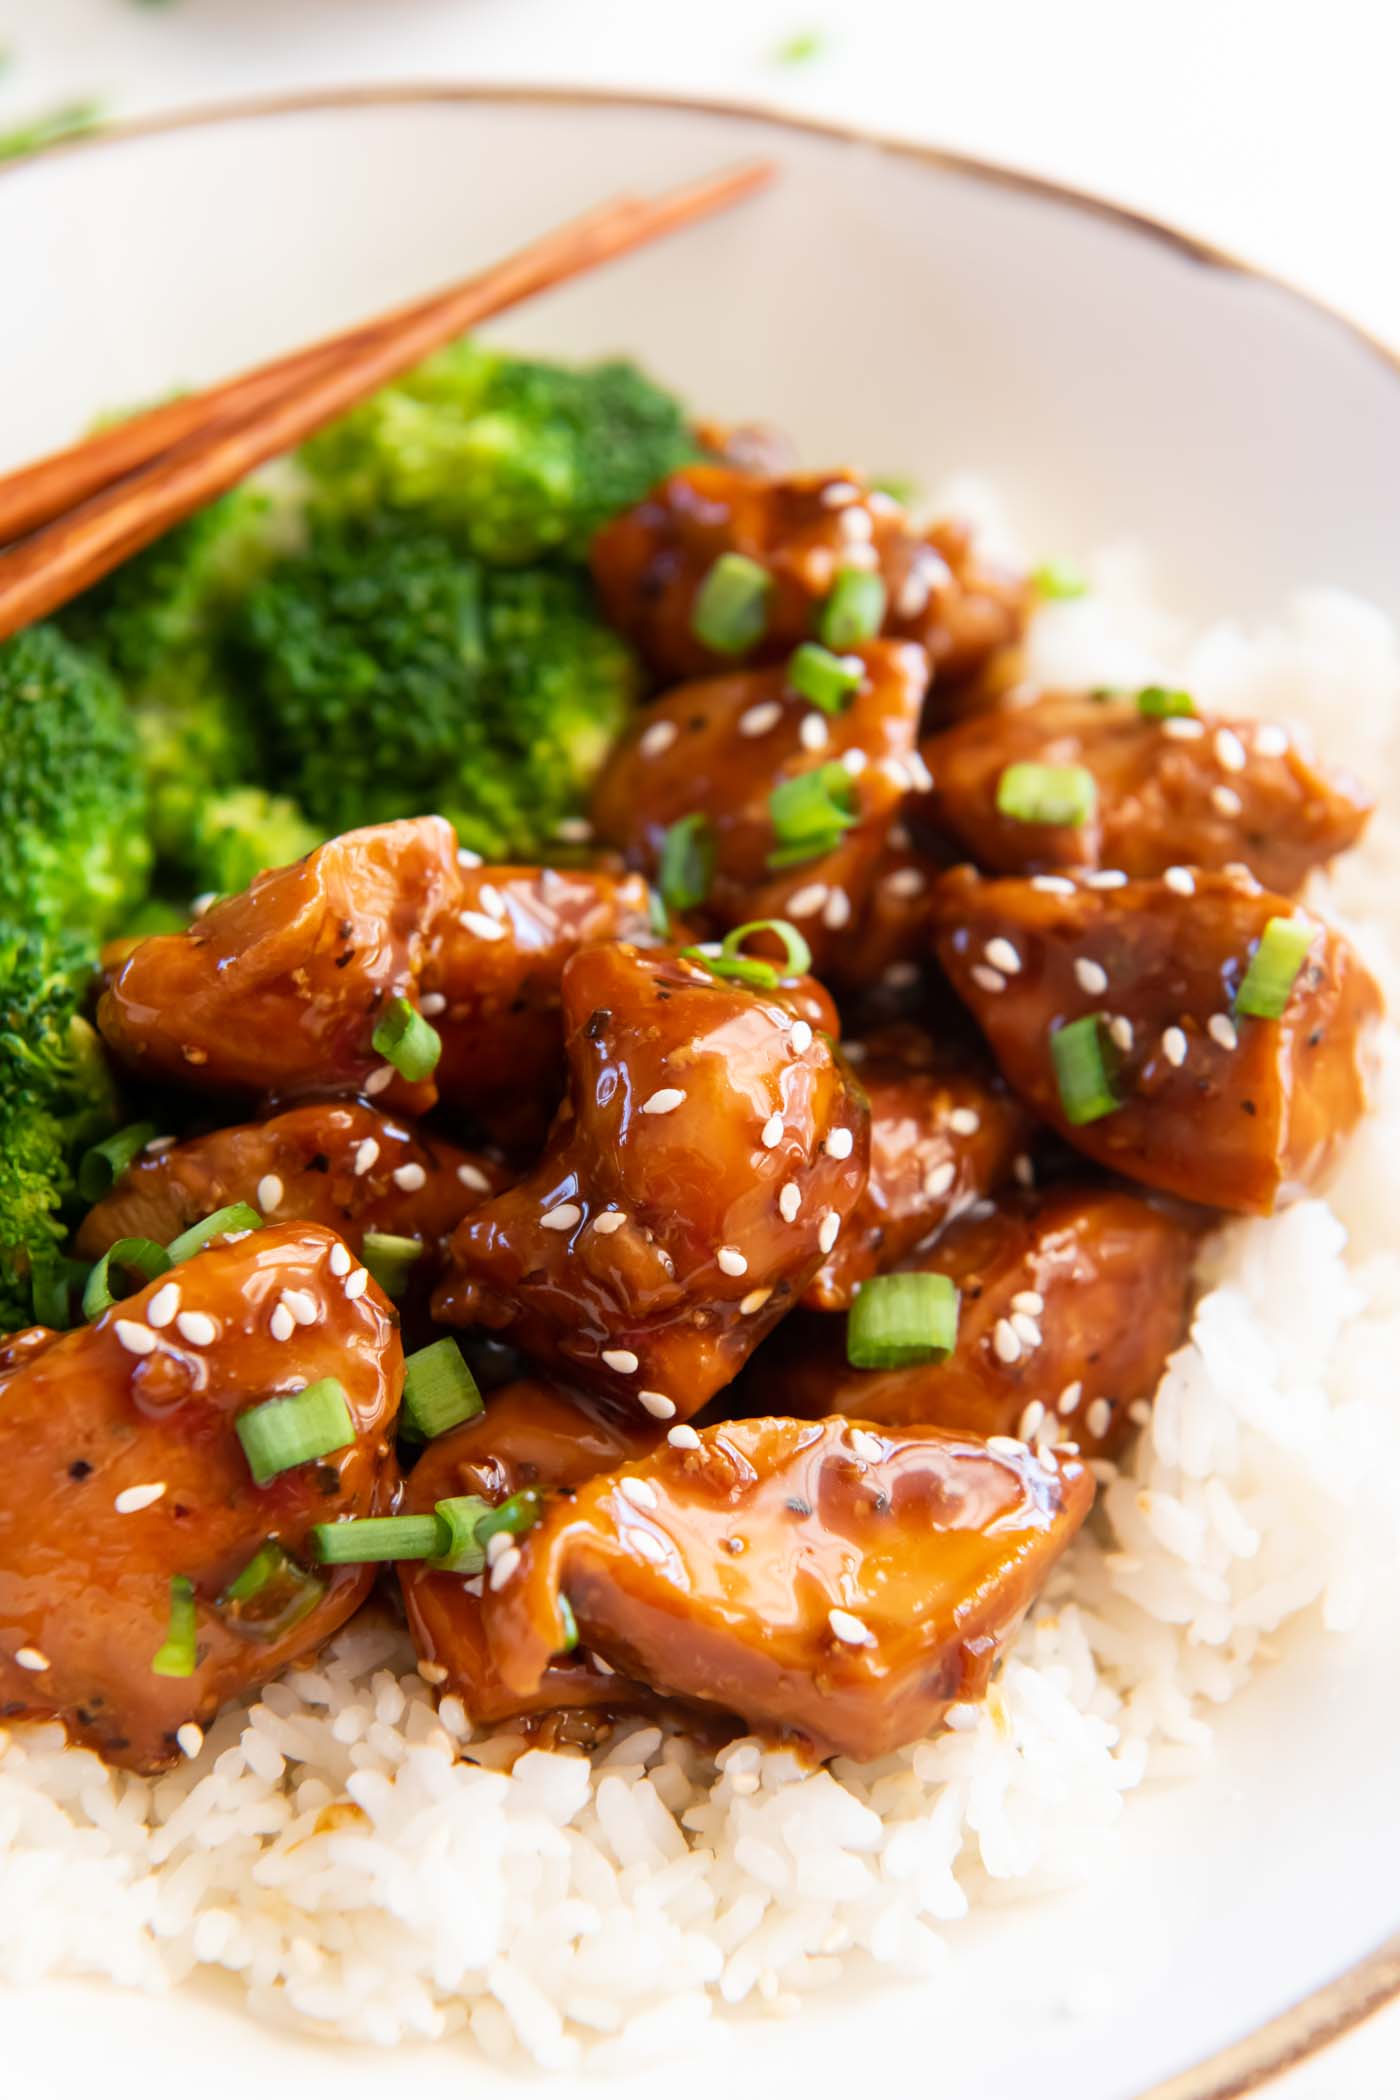 Teriyaki chicken served with white rice, broccoli, sesame seeds and green onions.